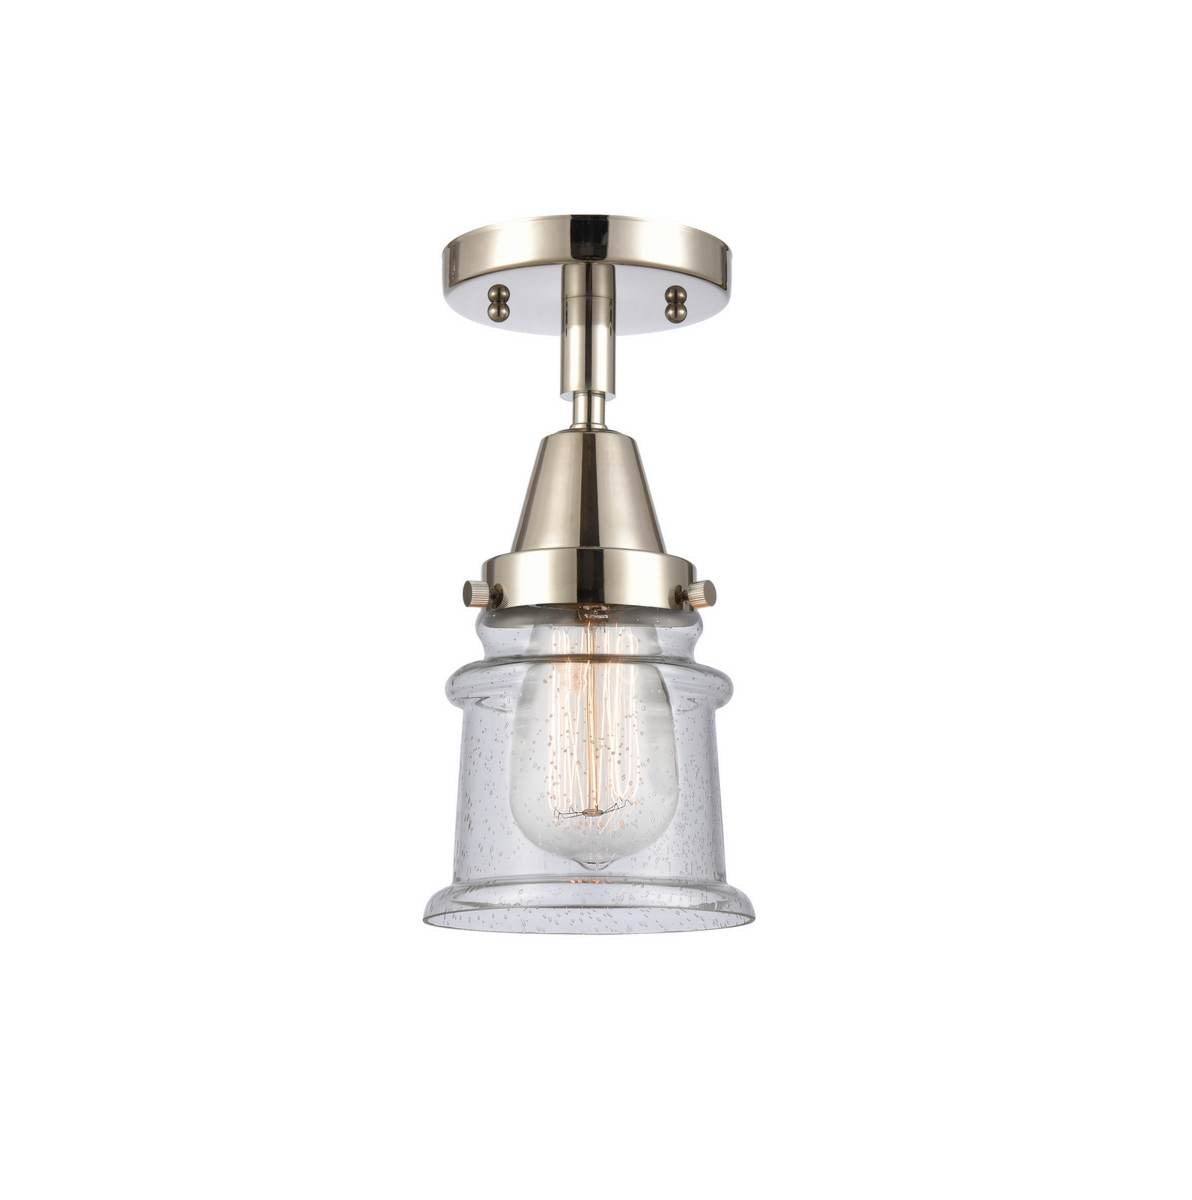 447-1C-PN-G184S 1-Light 6" Polished Nickel Flush Mount - Seedy Small Canton Glass - LED Bulb - Dimmensions: 6 x 6 x 10 - Sloped Ceiling Compatible: No